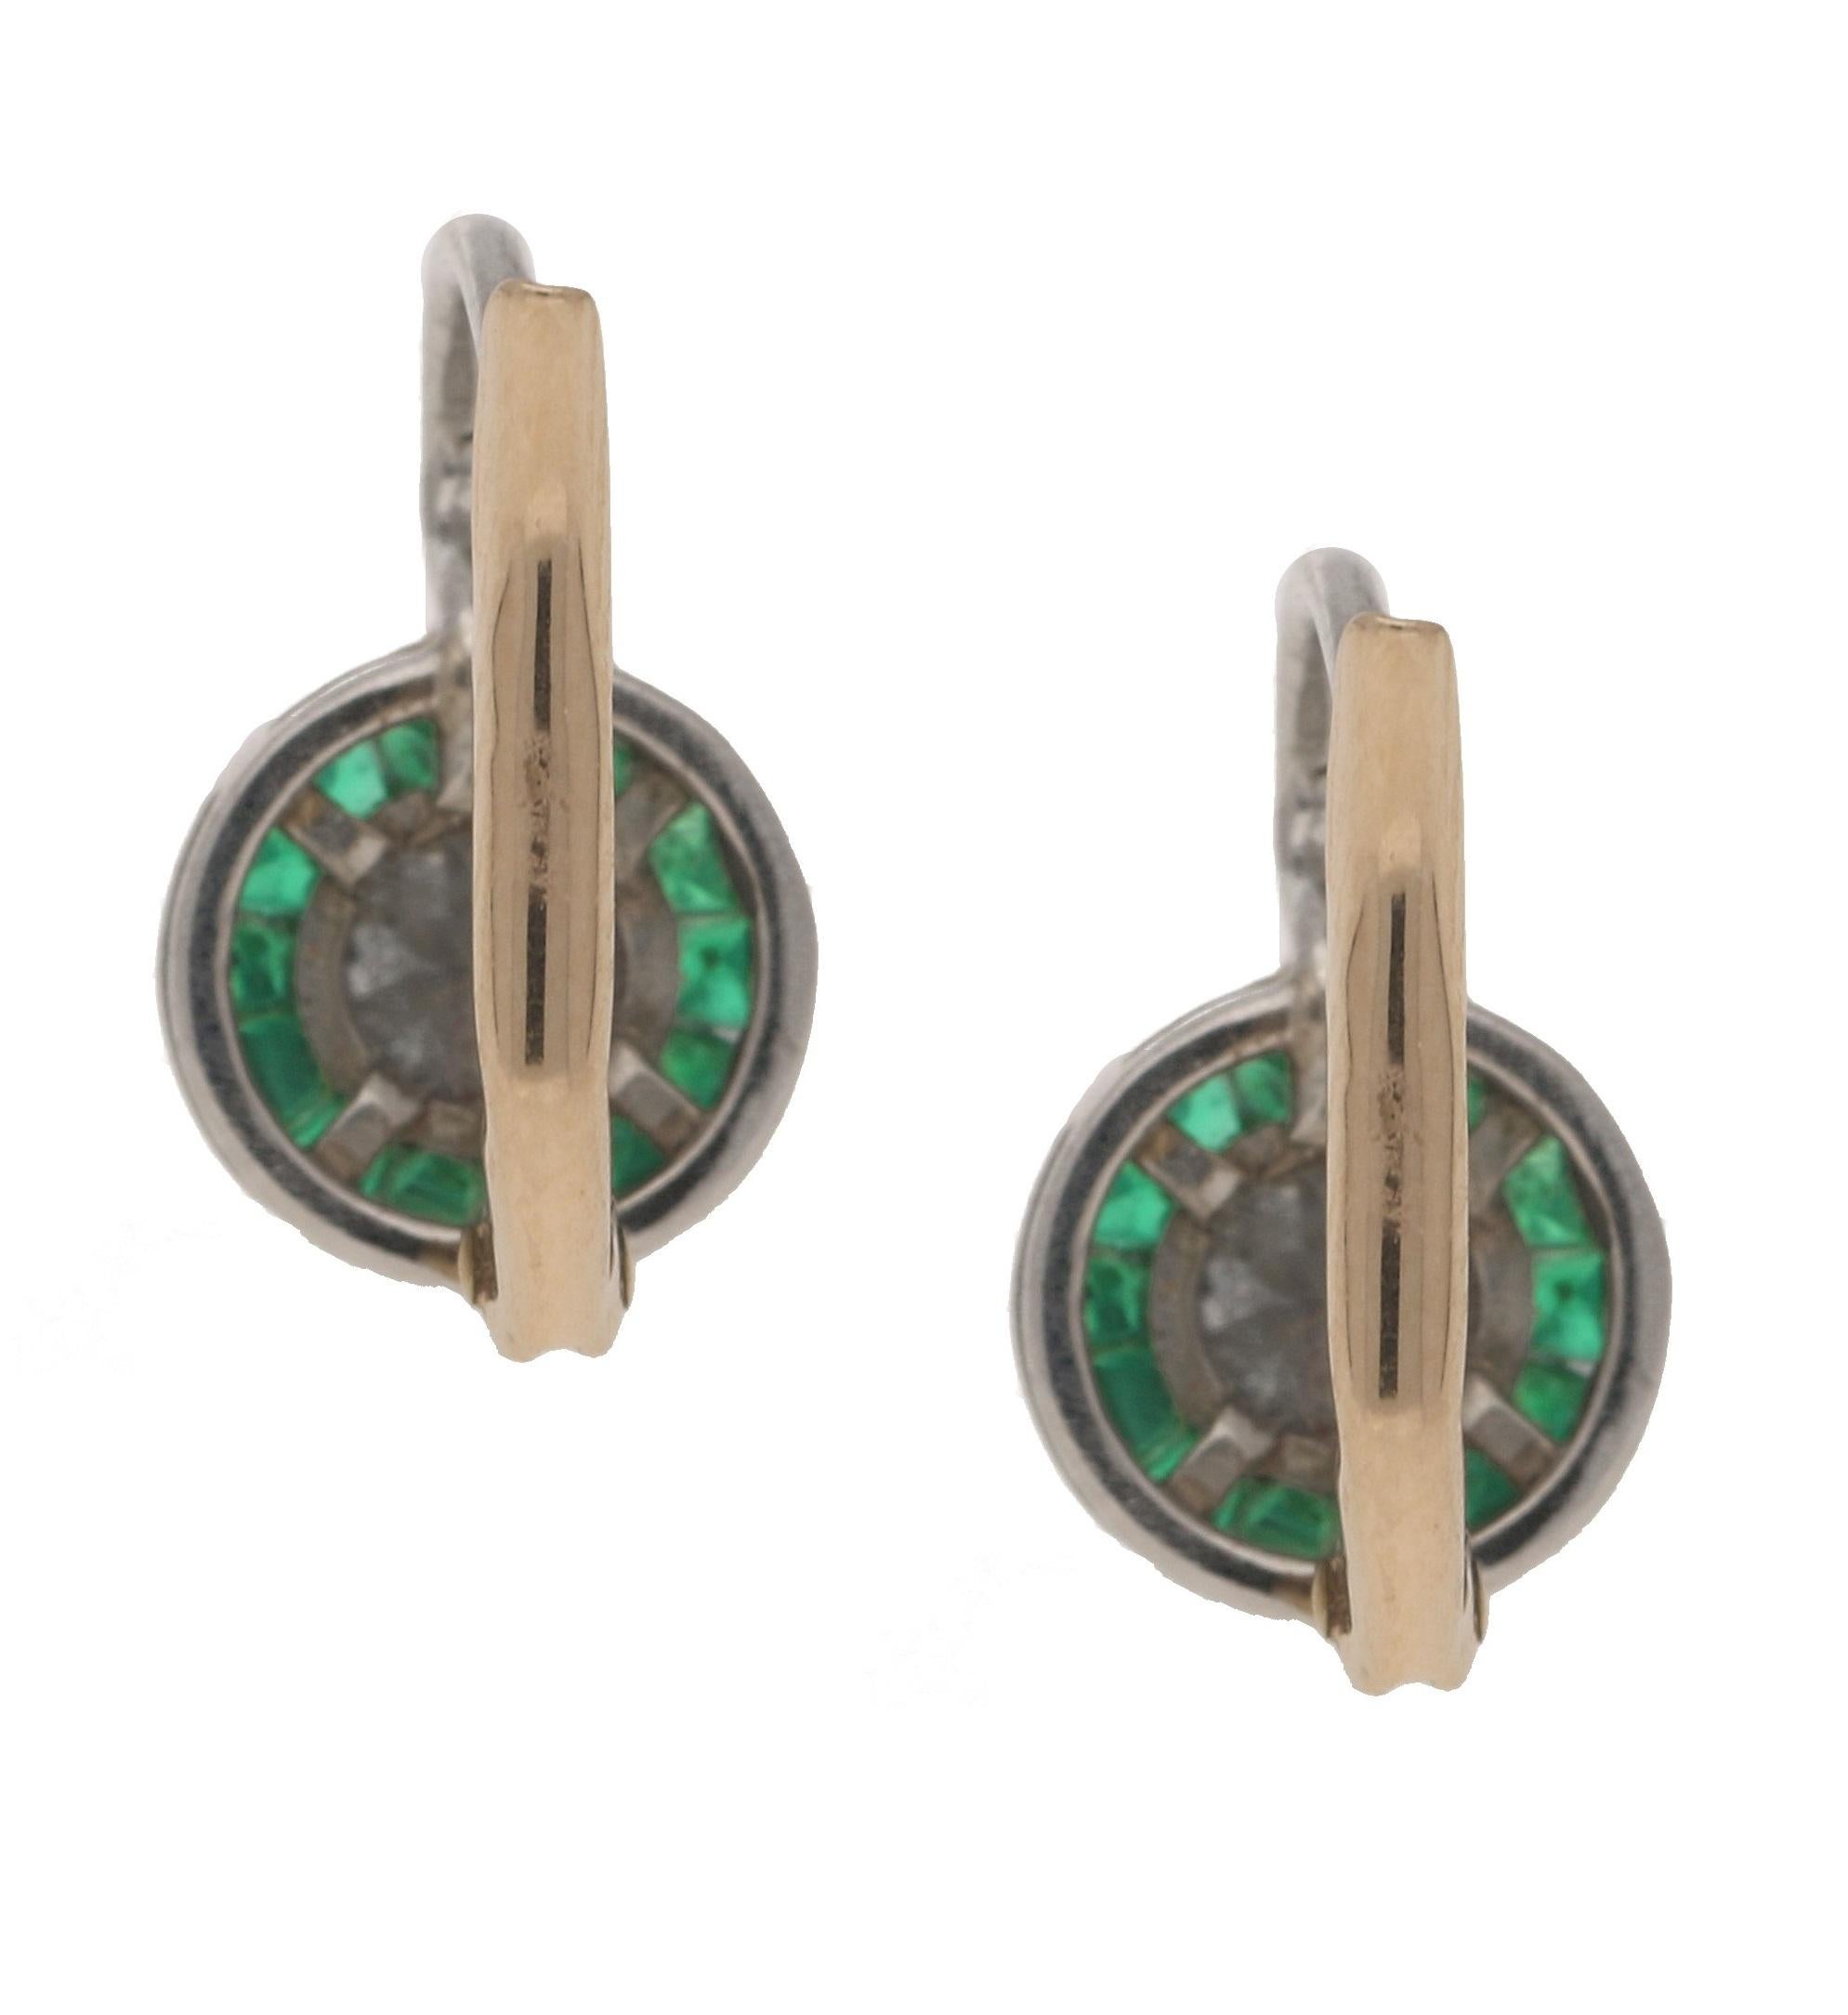 A pair of Art Deco styled diamond and emerald target earrings in 18-karat white and rose gold, each earring featuring an Old European brilliant-cut diamond millegrain-set to the centre, encircled by a halo of similarly-set calibre-cut emeralds, all